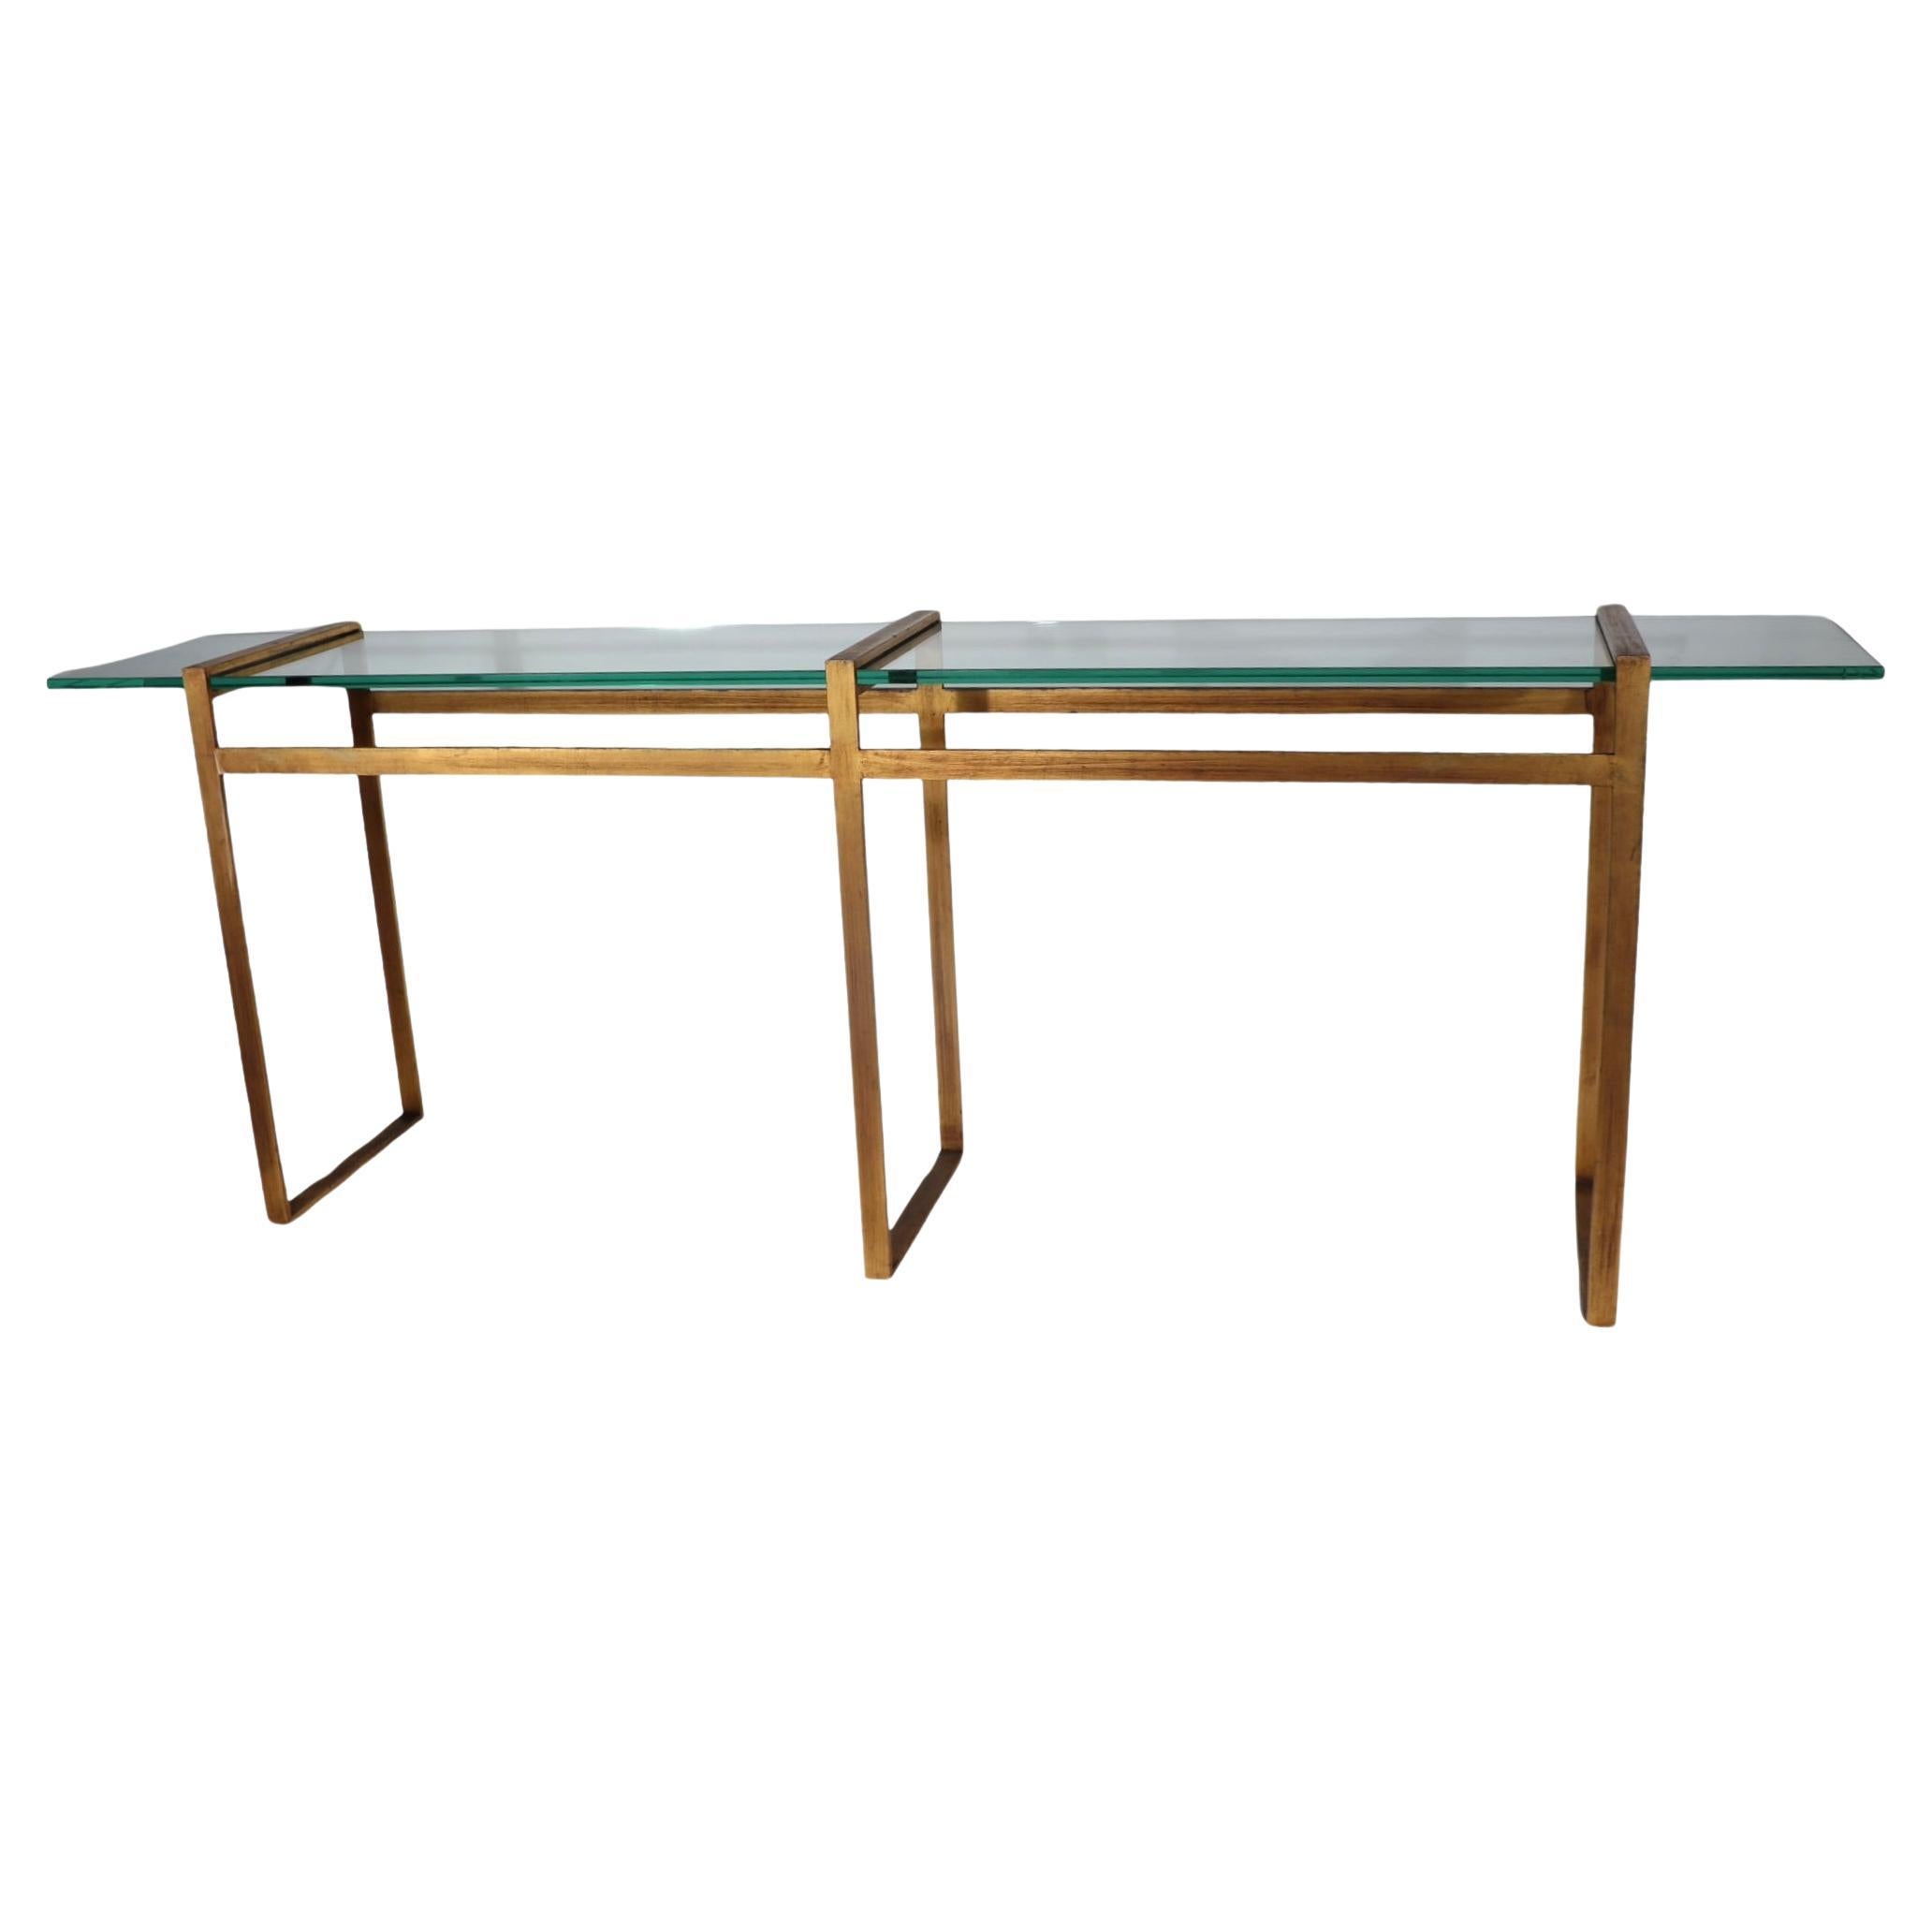 Large Modernist Metal and Glass Console in Faux Gilt Finish c 1970’s For Sale